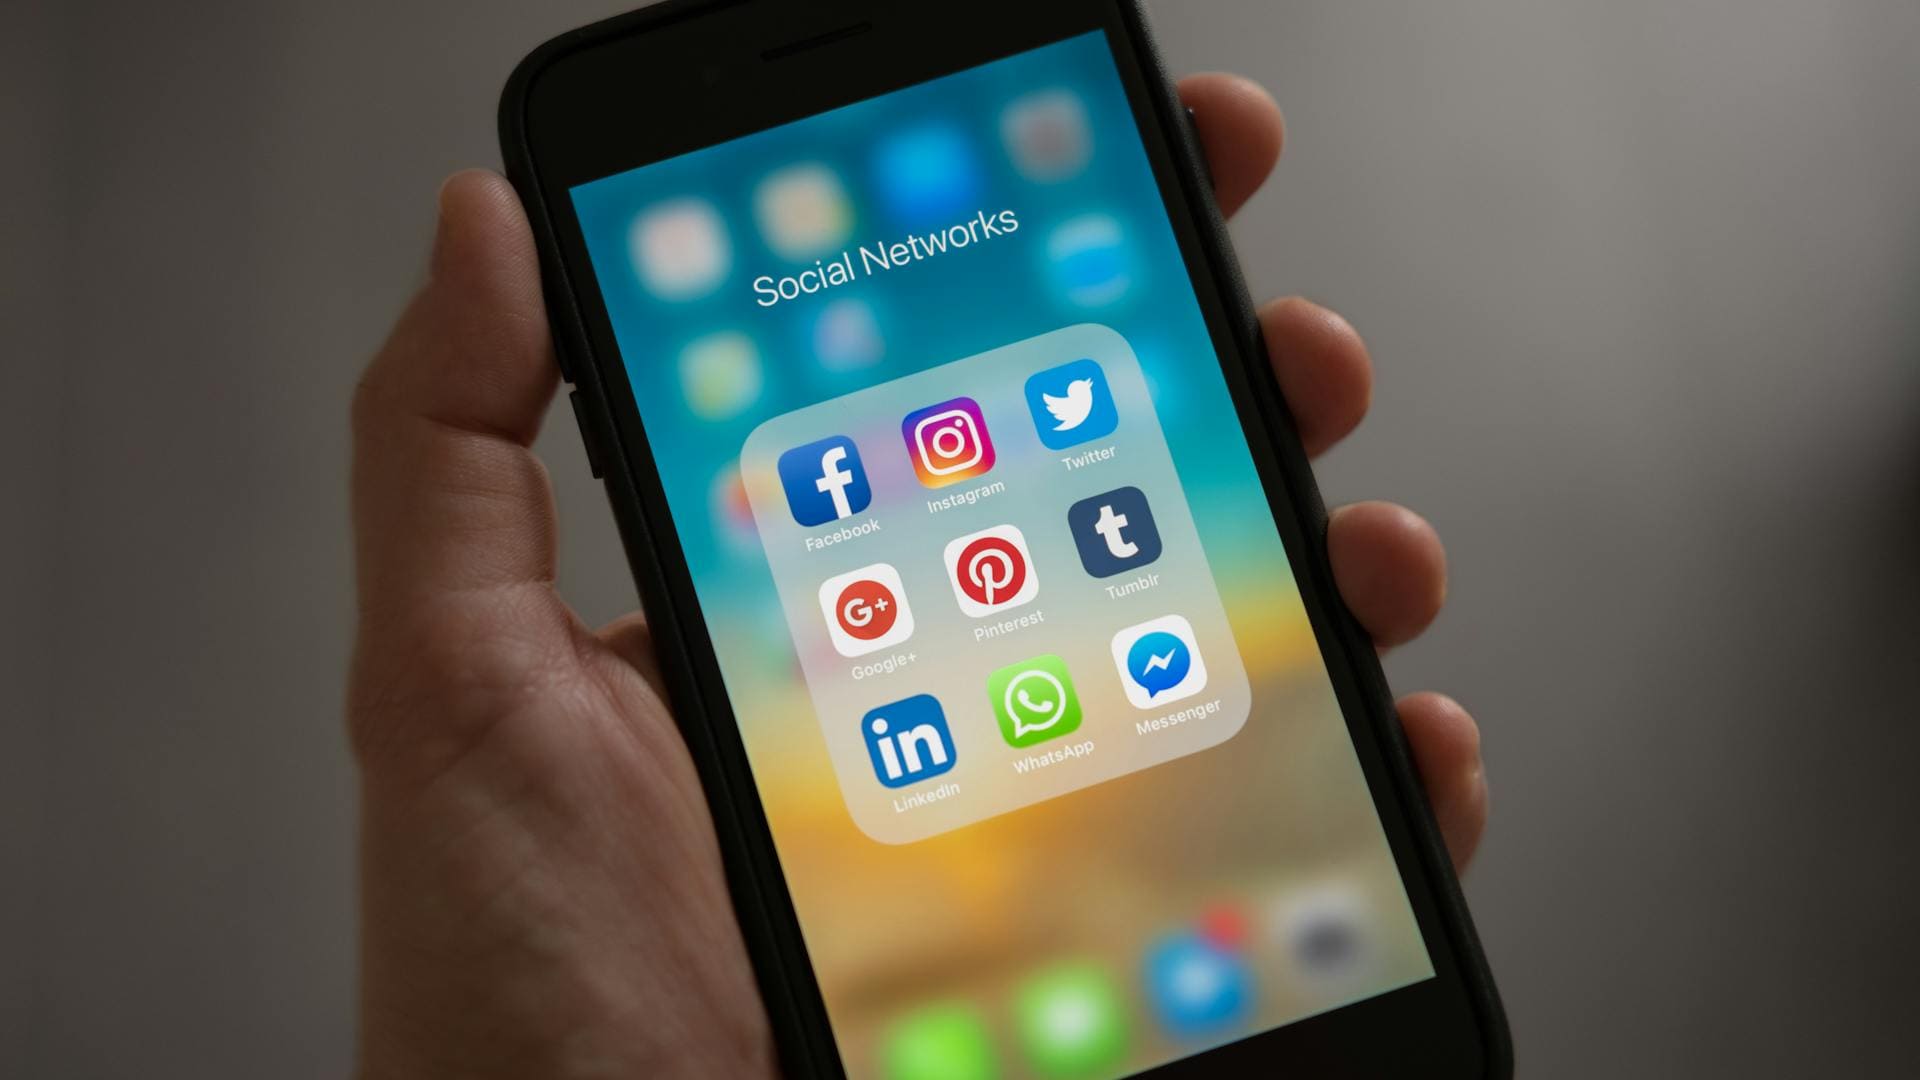 E-Commerce Developer; The image shows a close-up of a hand holding a smartphone with various social media apps open.  The apps include Facebook, Instagram, and Twitter.  The phone also has a chat window open, but the content of the chat is not visible.